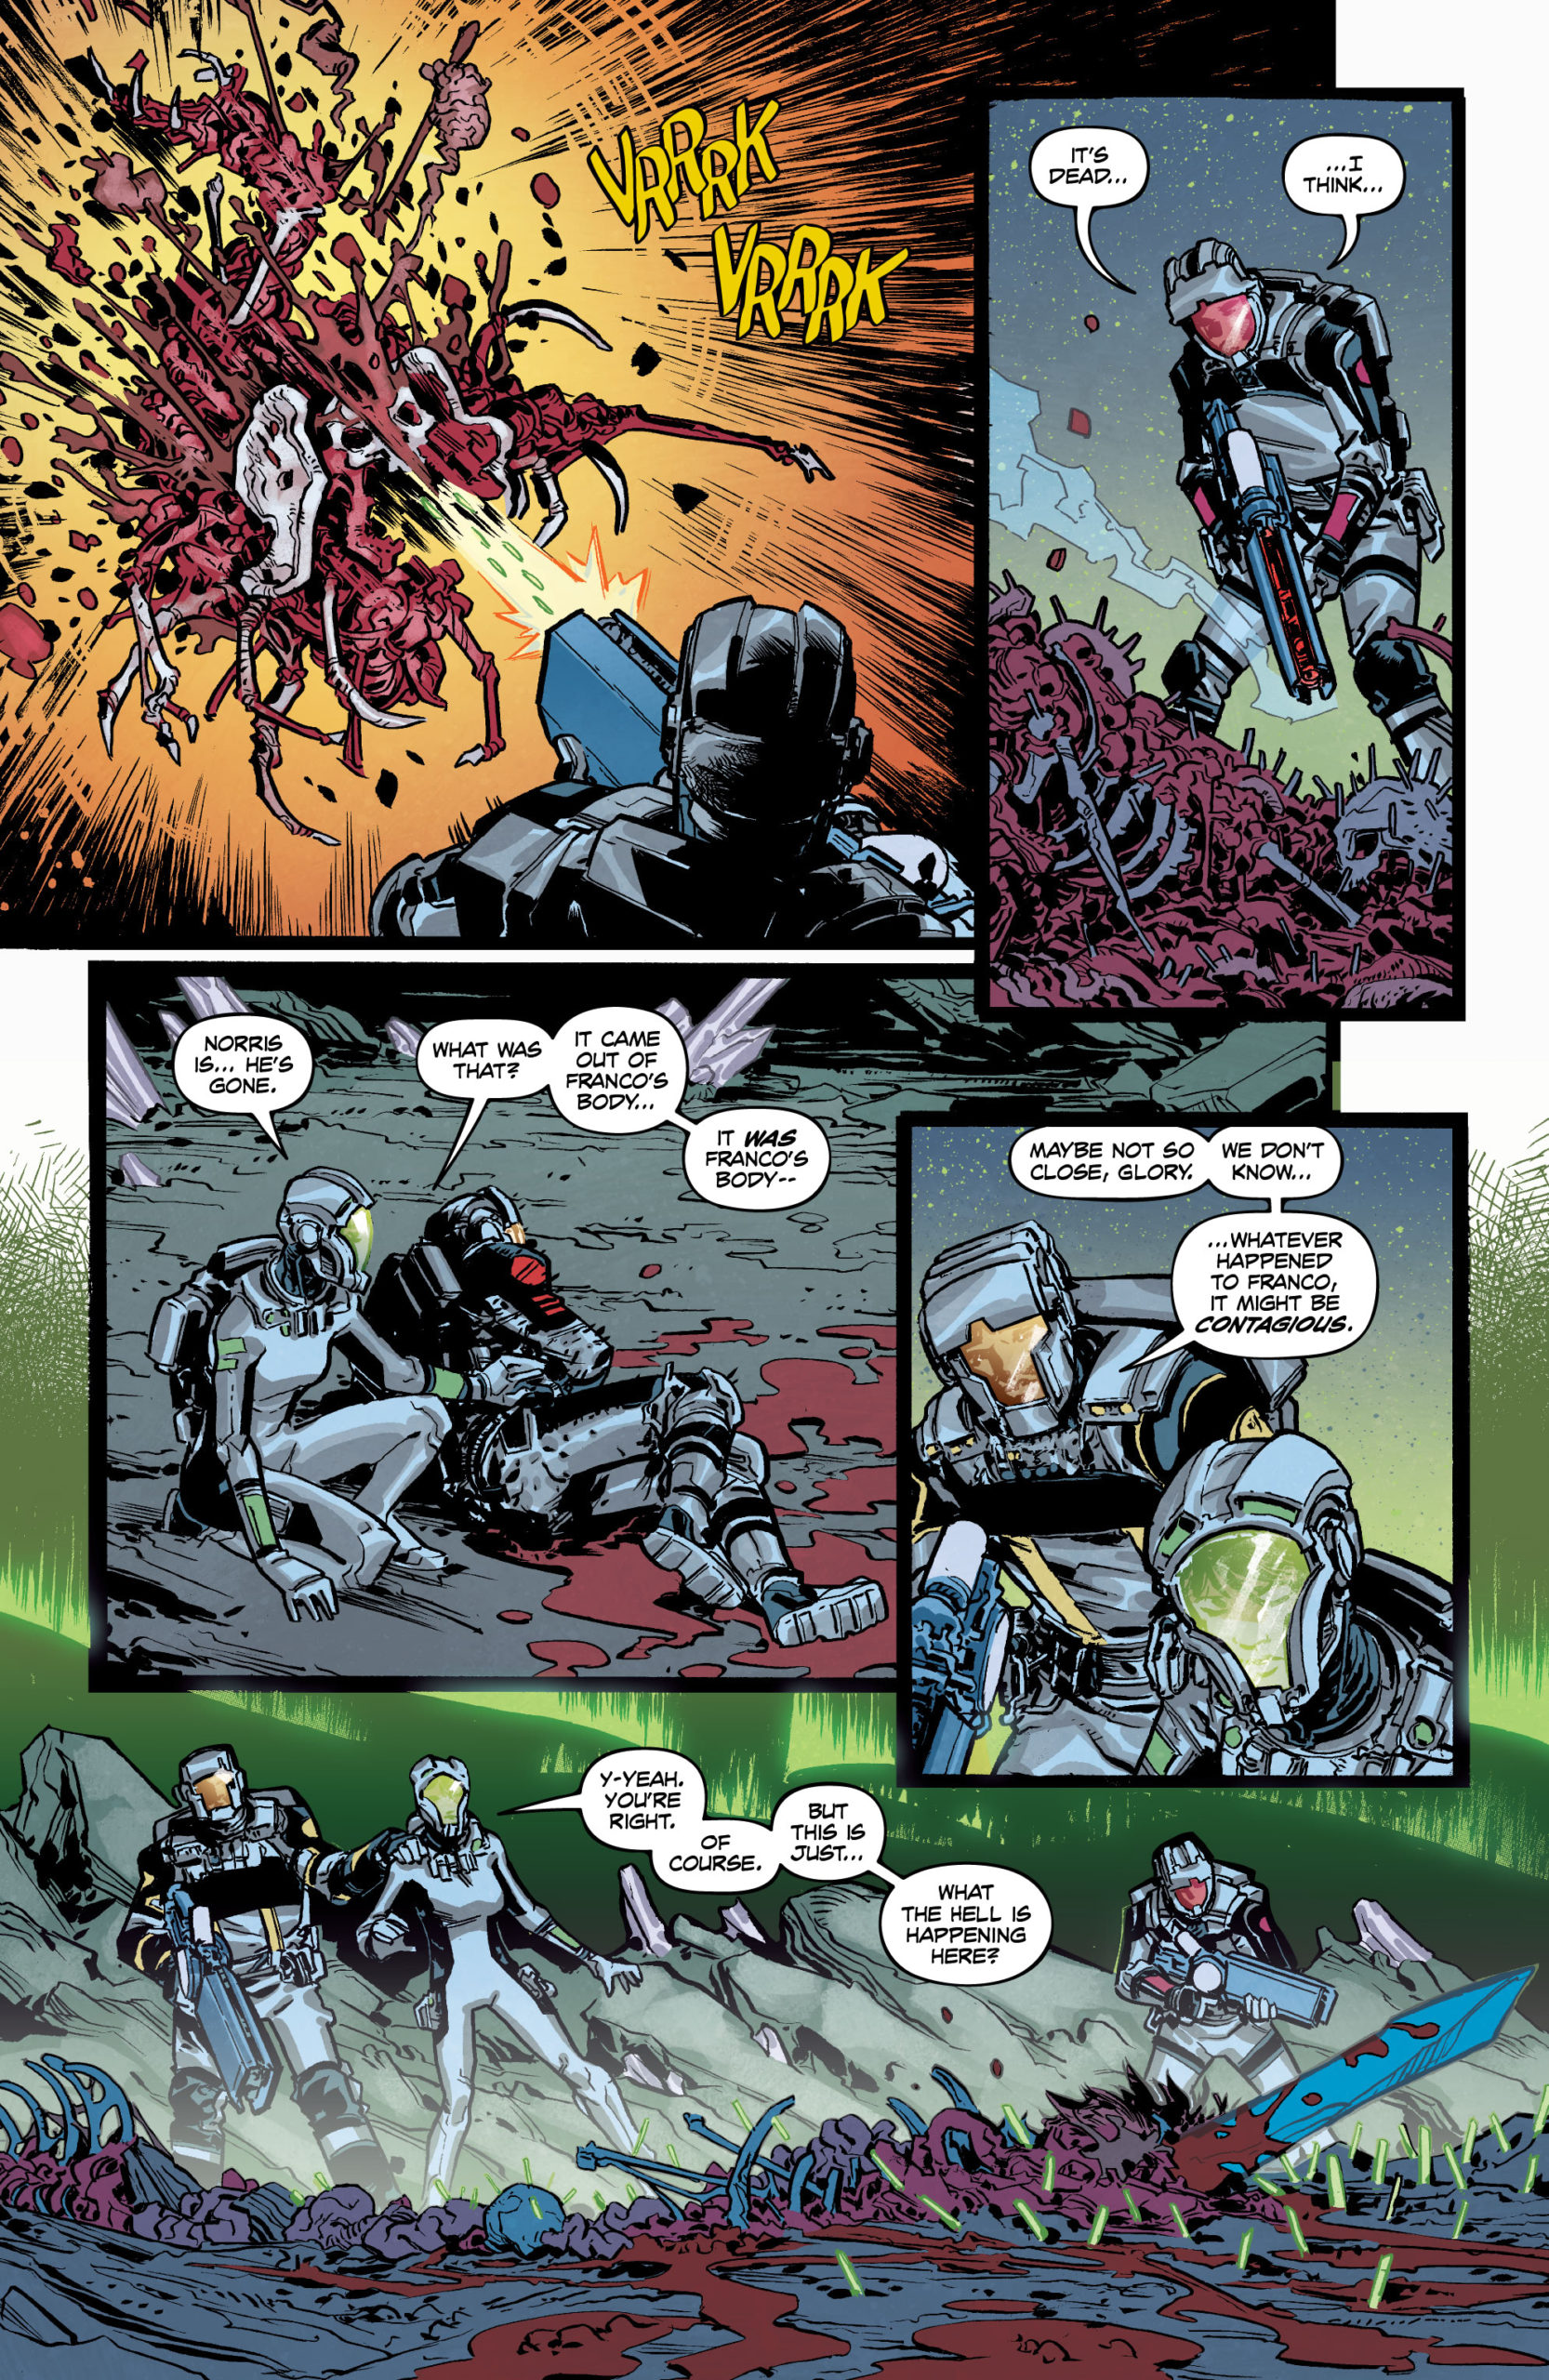 A series of panels shows two crew members in space suits confront and shoot an unknown creature, killing it and leaving a puddle of blood and bone. 